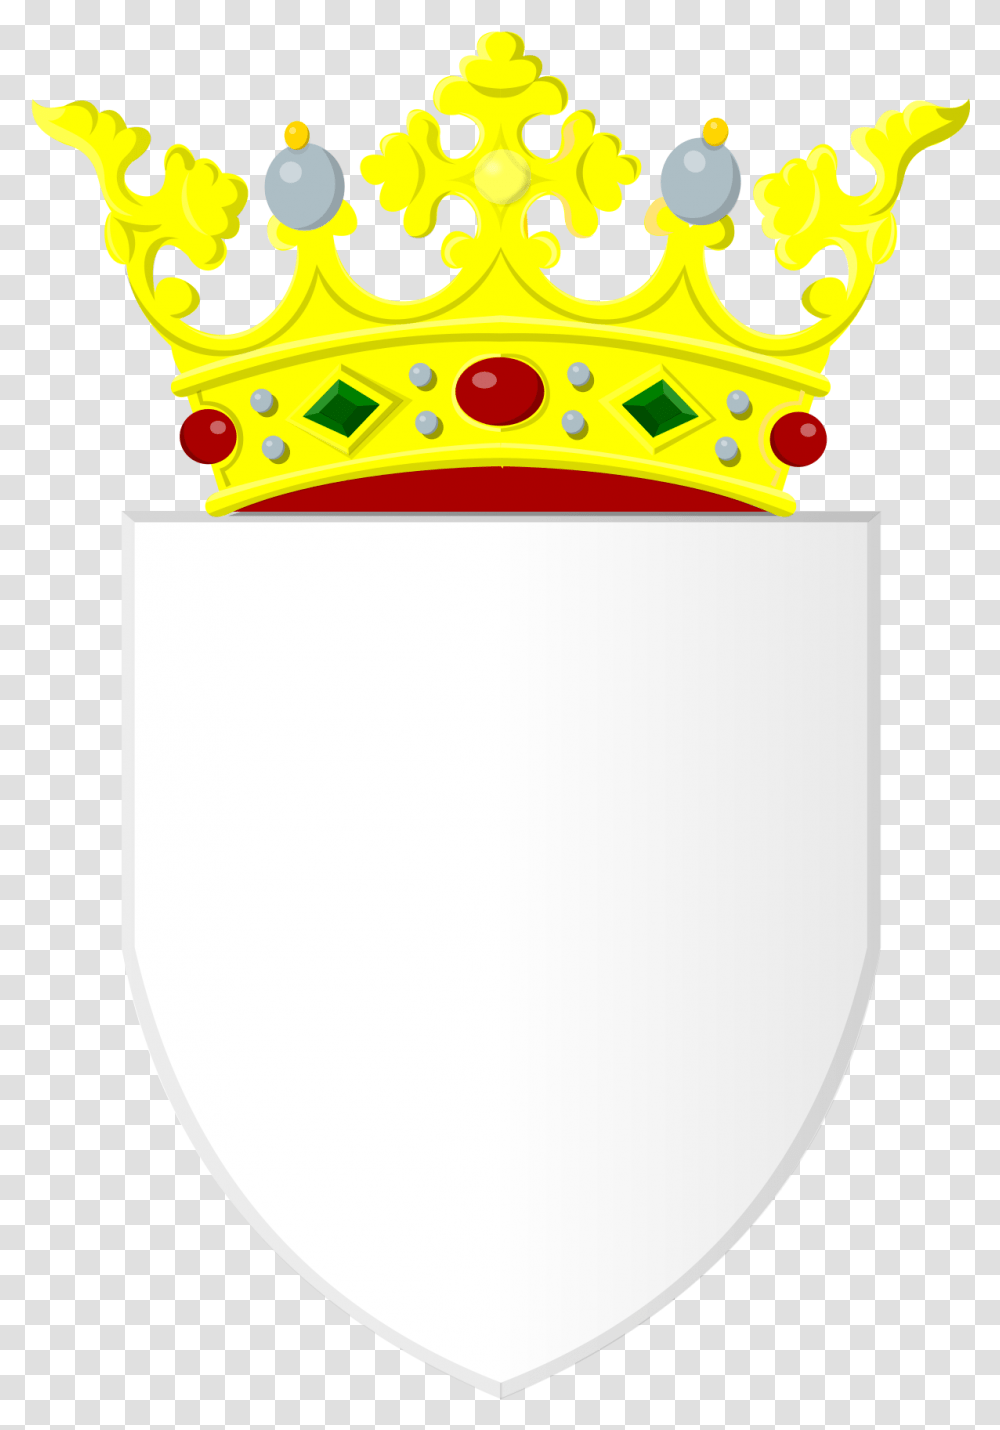 Filesilver Shield With Golden Crown 3svg Wikimedia Commons Silver, Jewelry, Accessories, Accessory, Armor Transparent Png